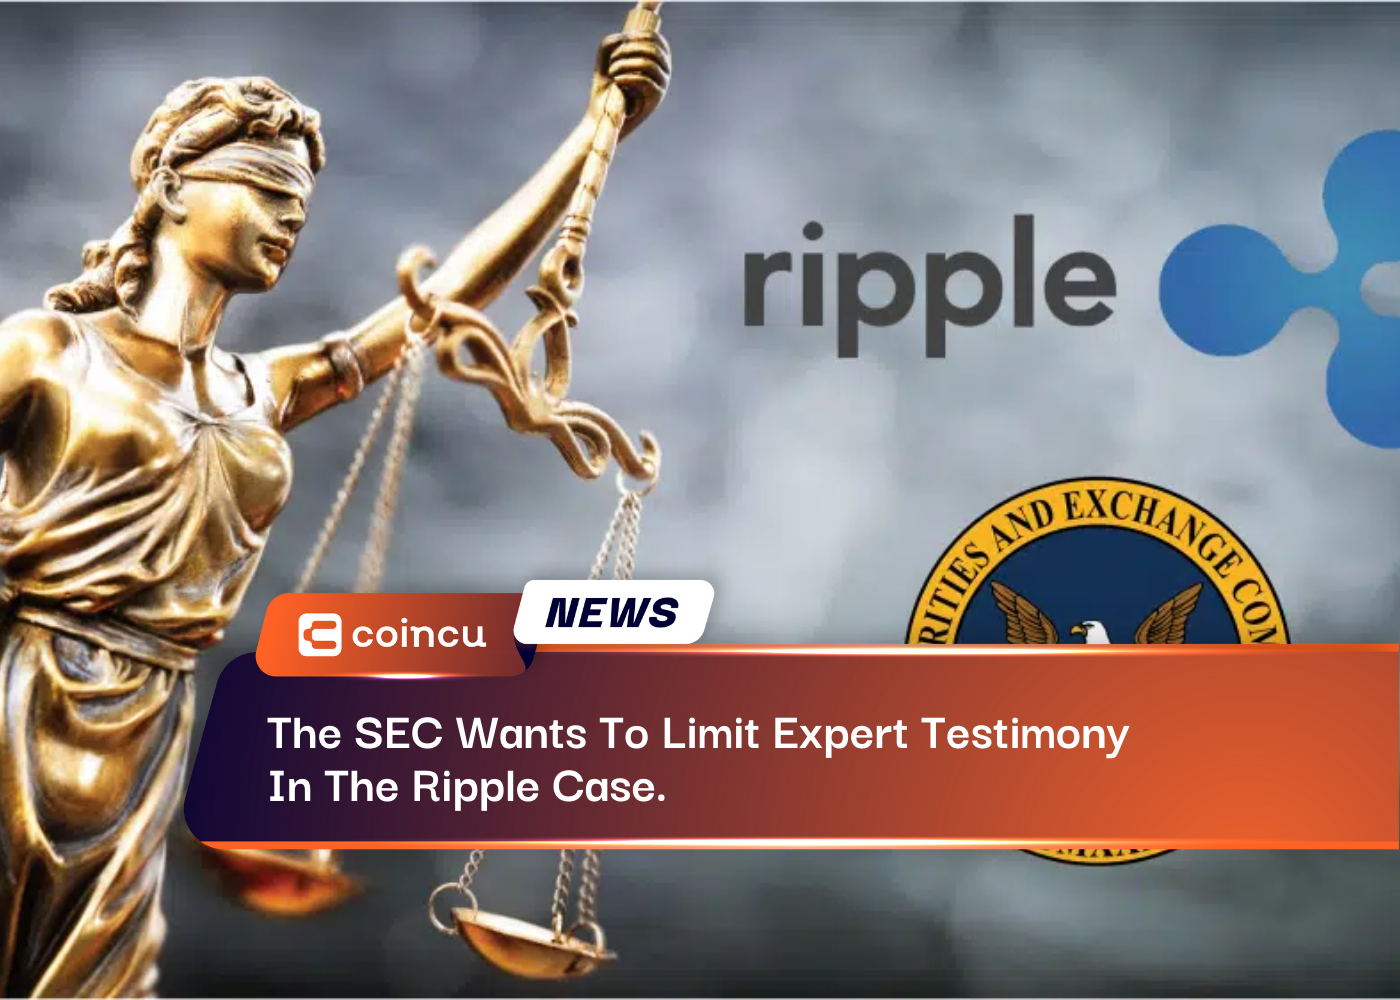 The SEC Wants To Limit Expert Testimony In The Ripple Case.